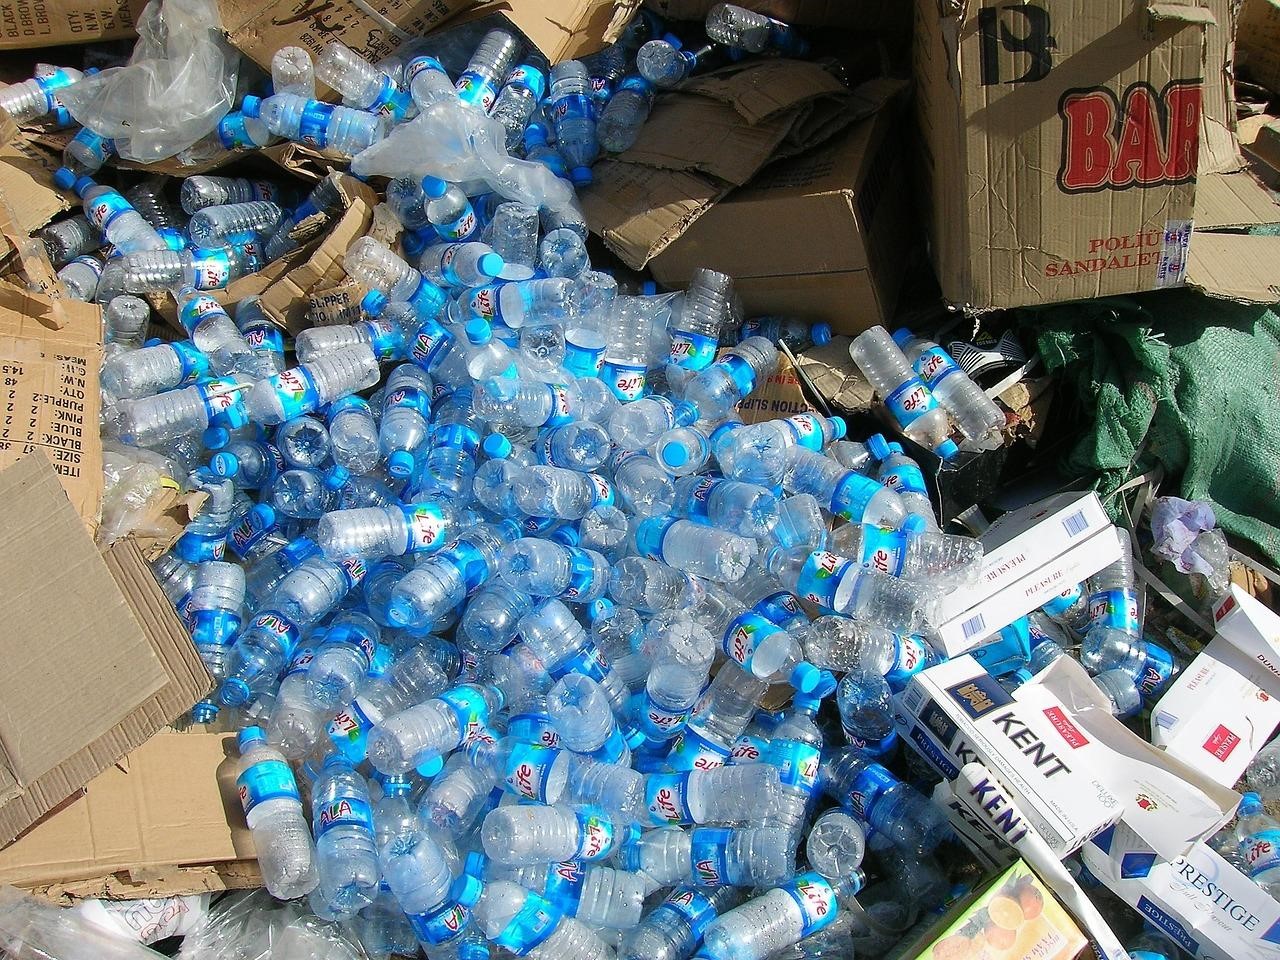 Countless used clear plastic water bottles with labels and caps on together with plastic bags,  cardboard, paper, and other materials 